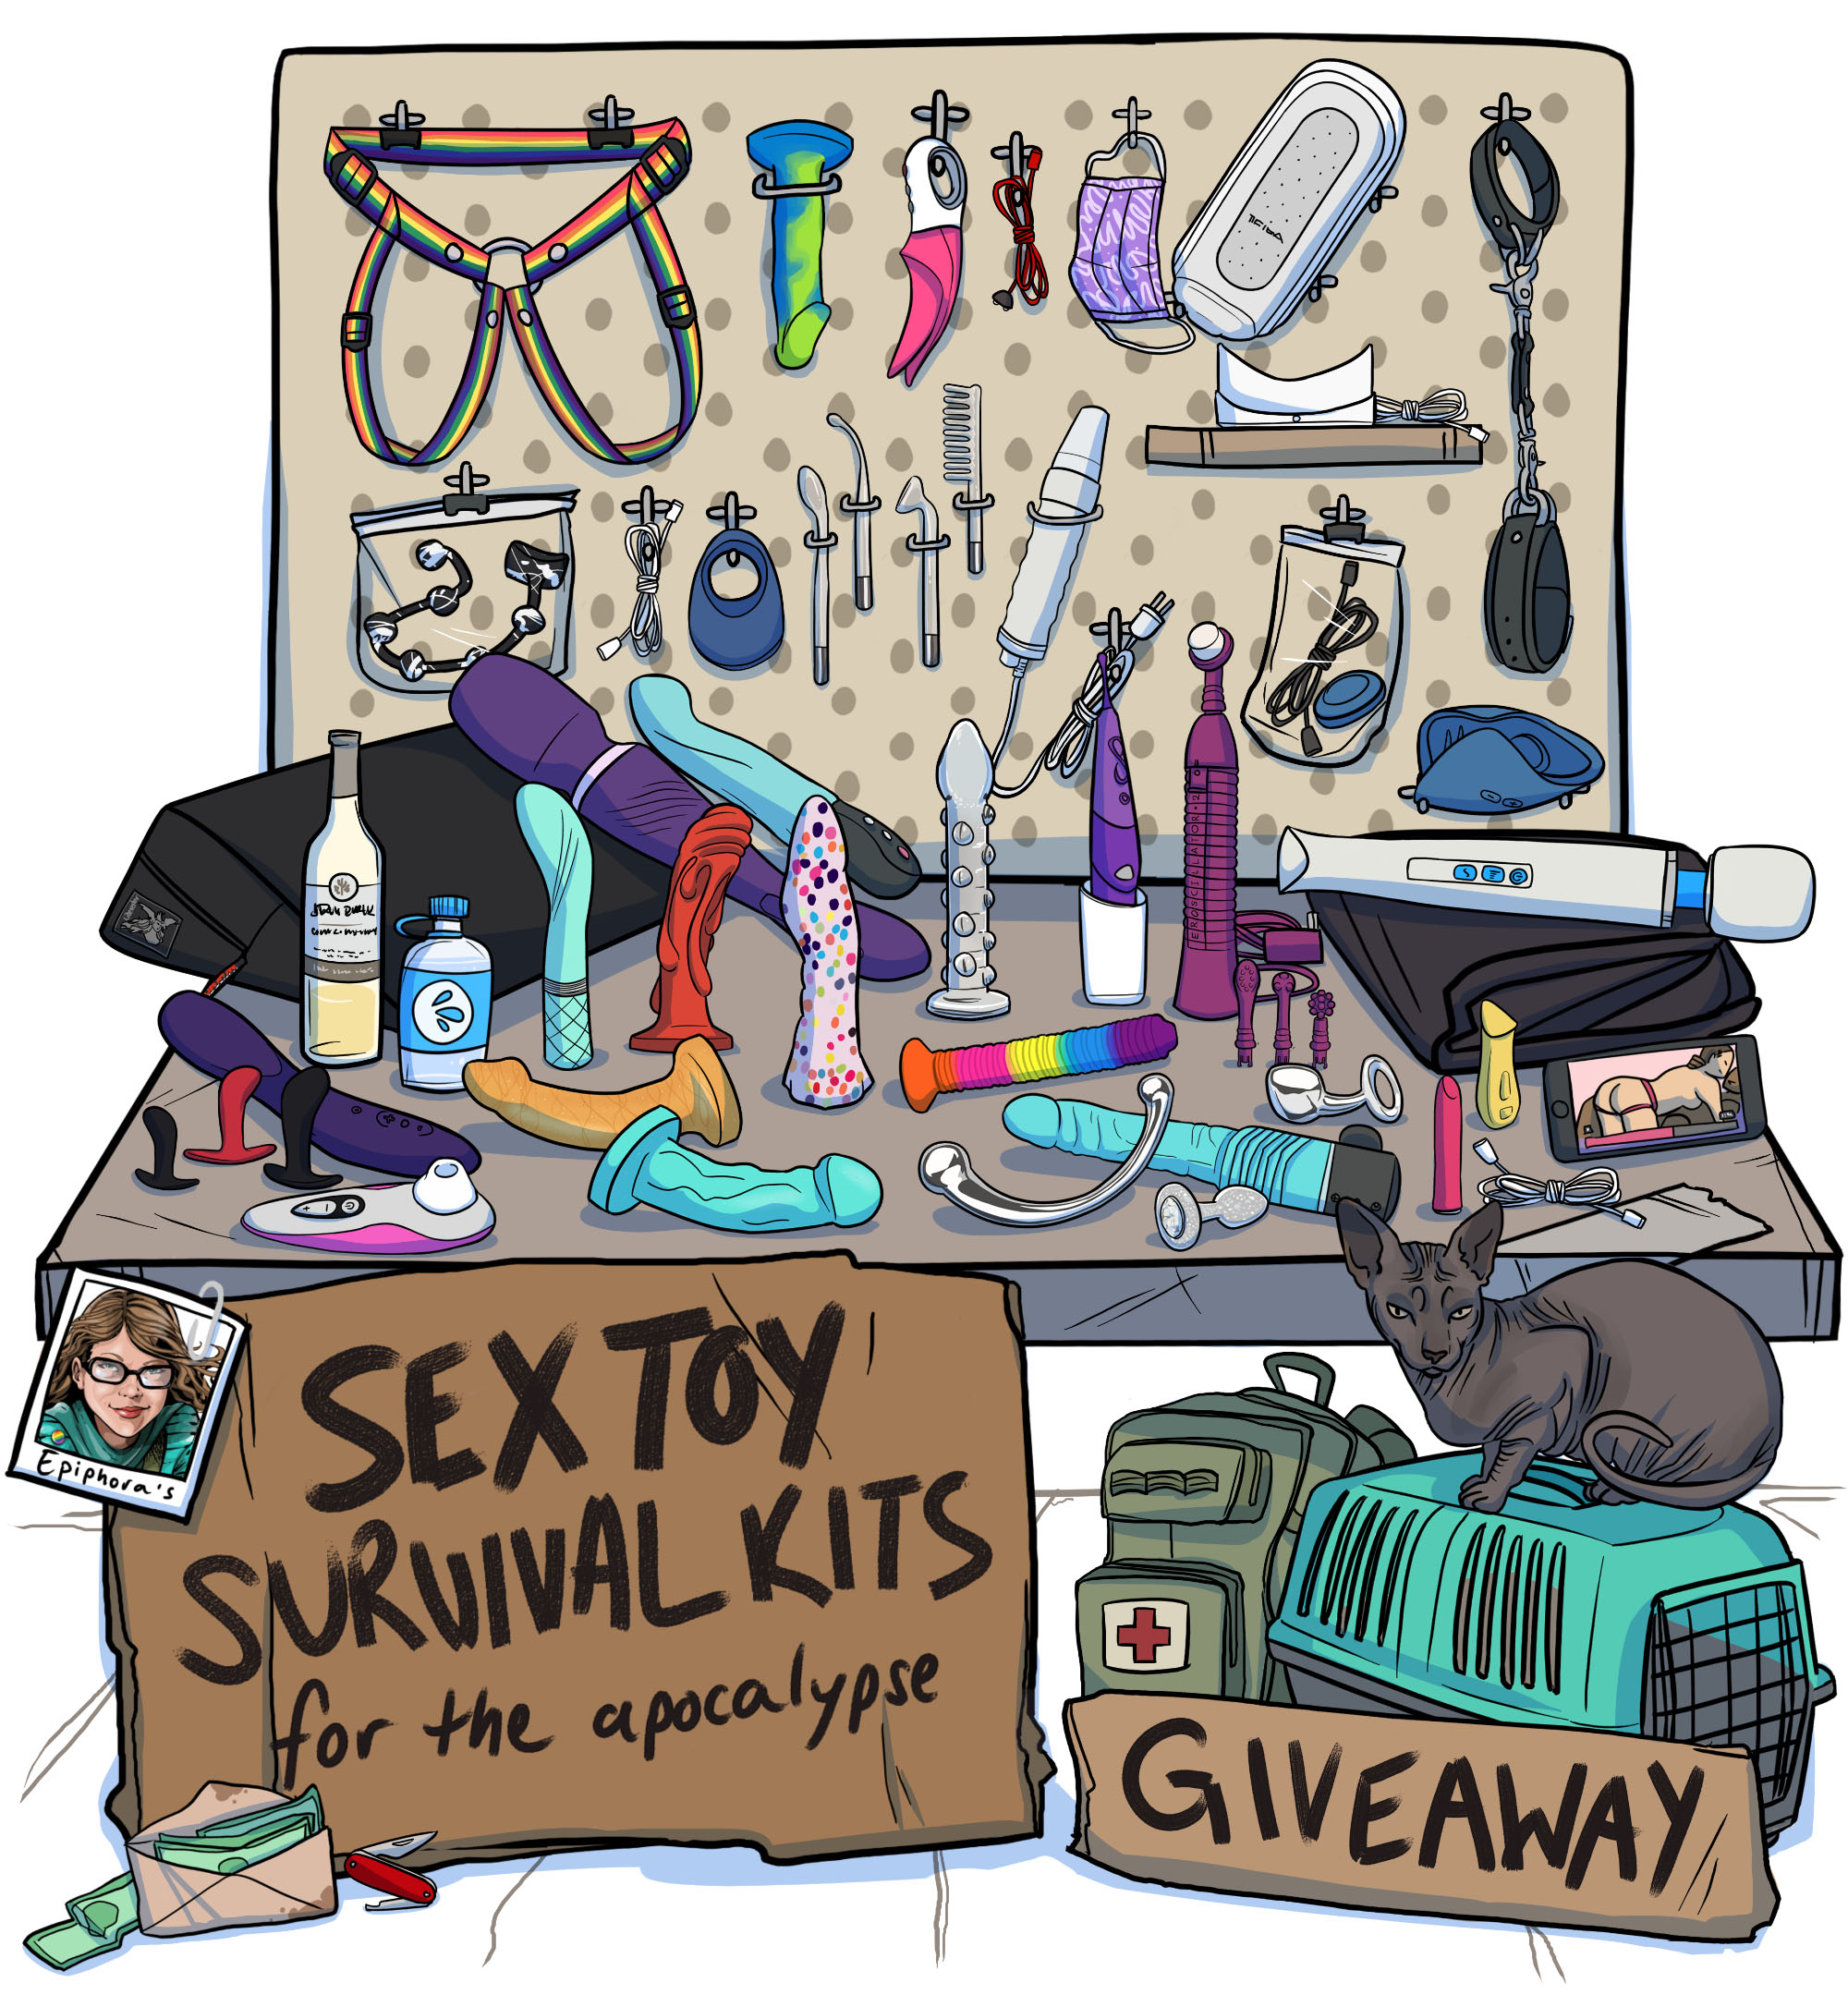 Giveaway sex toy survival kits for the apocalypse » Hey Epiphora image